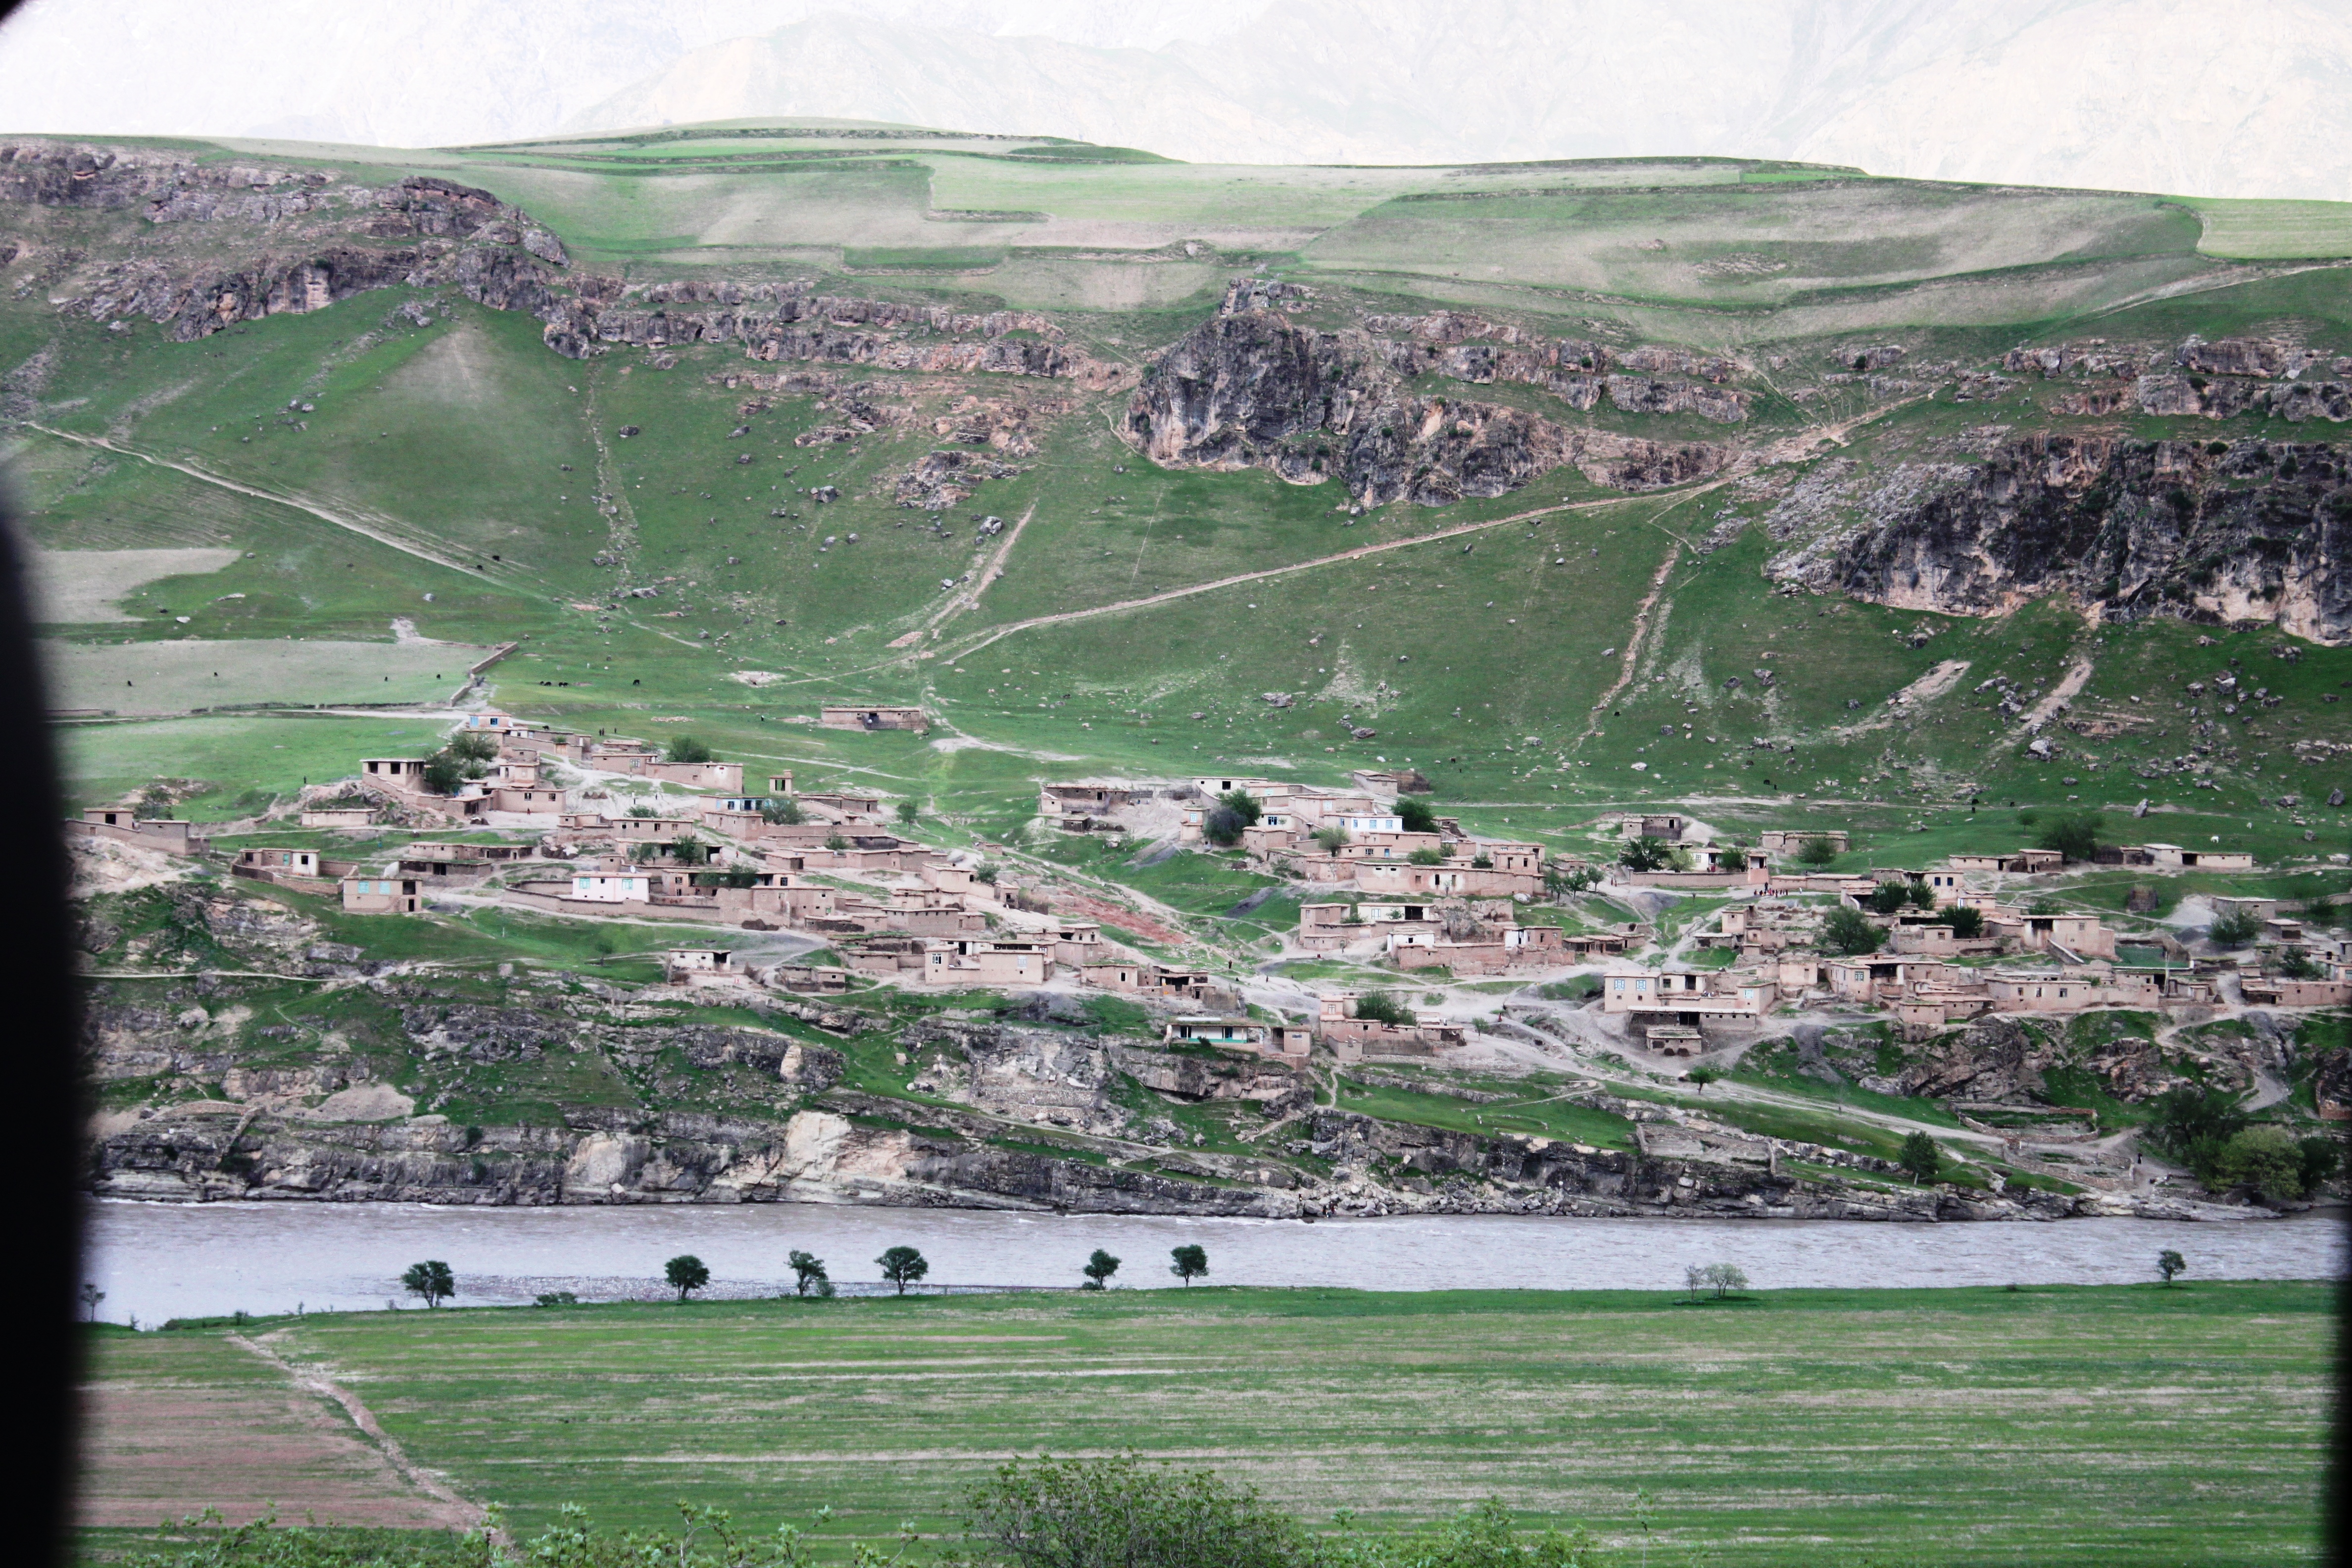 Afghan villages on other side of the river. Photo by Abdulfattoh Shafiev